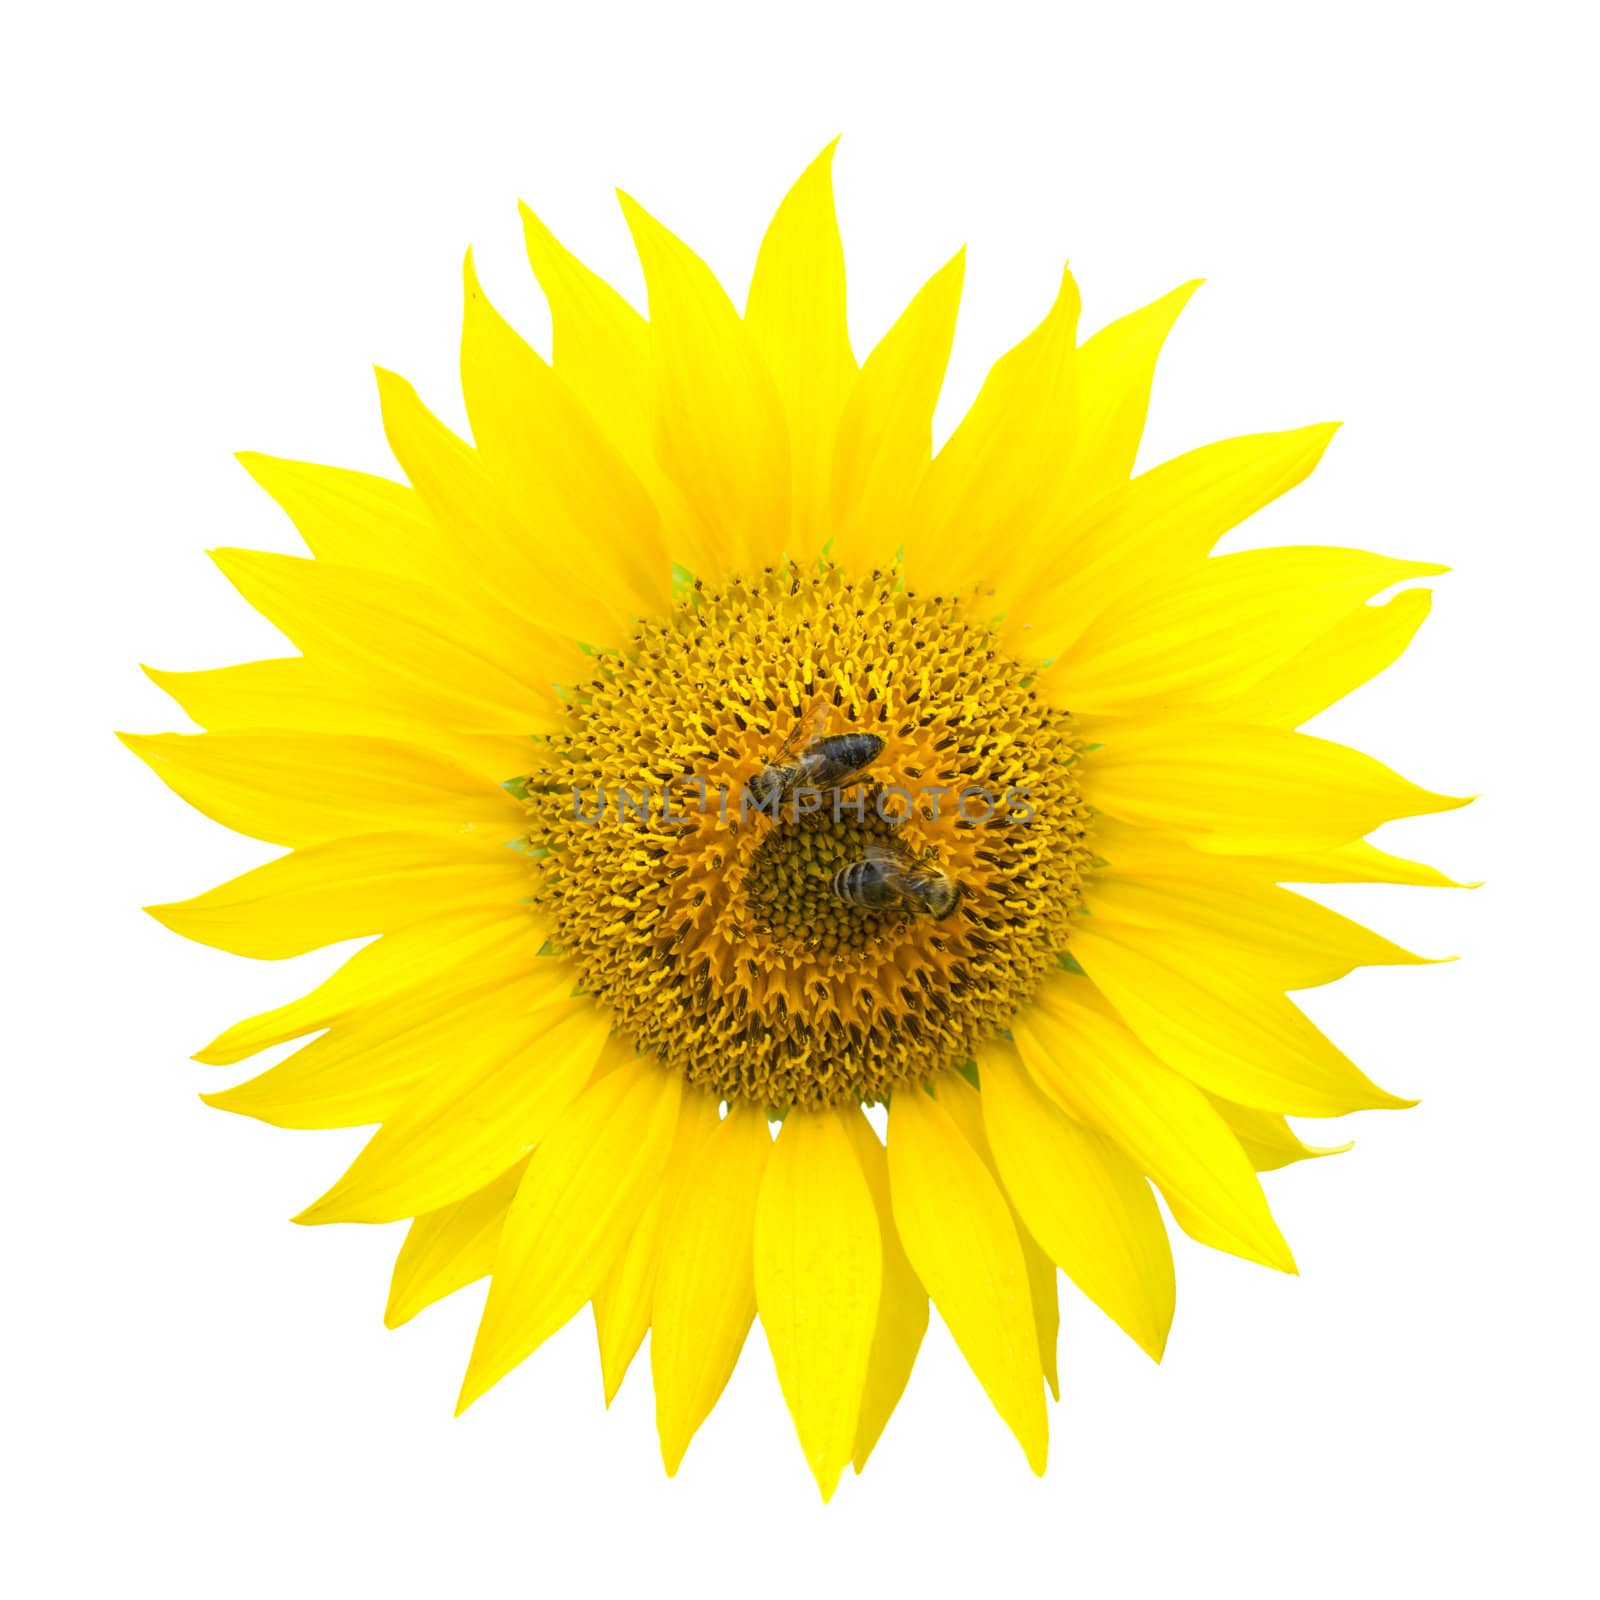 Two bees on a sunflower. Object on the white background.